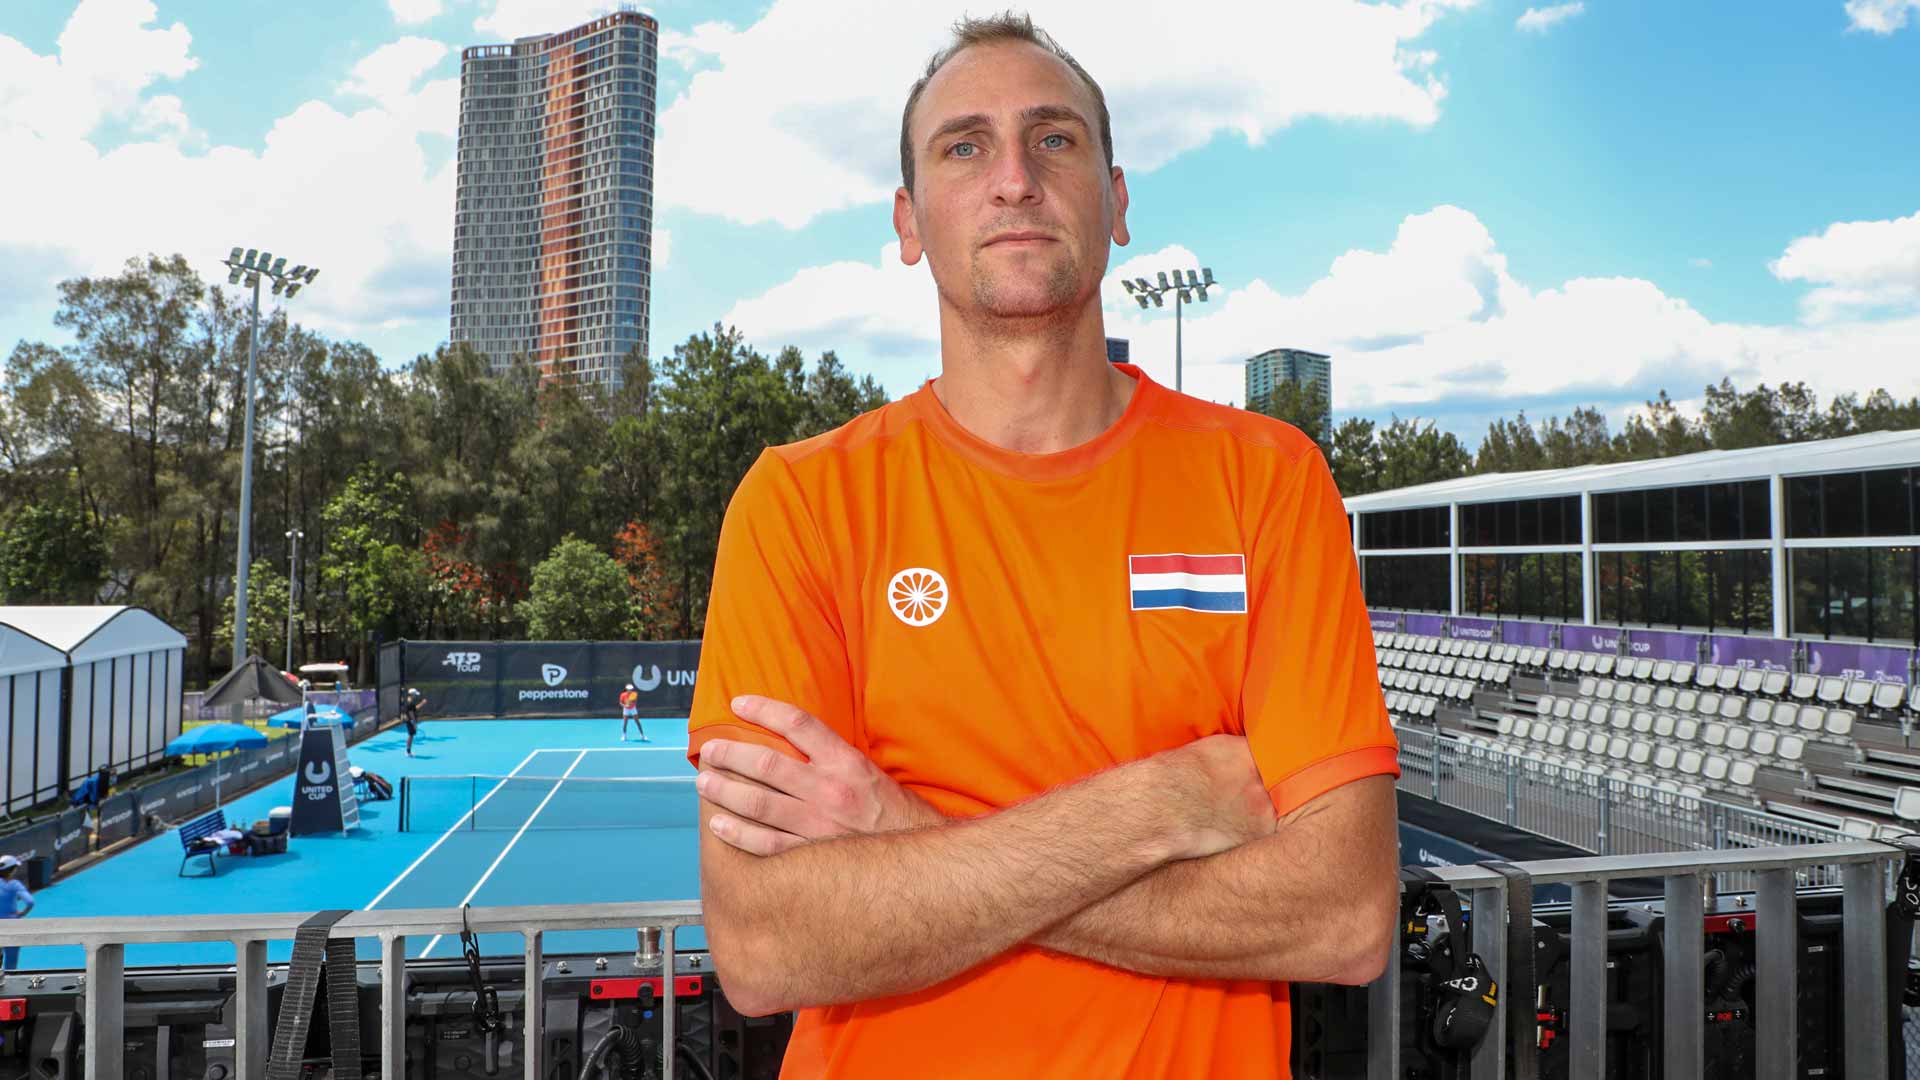 Thiemo De Bakker has climbed as high as No. 40 in the Pepperstone ATP Rankings